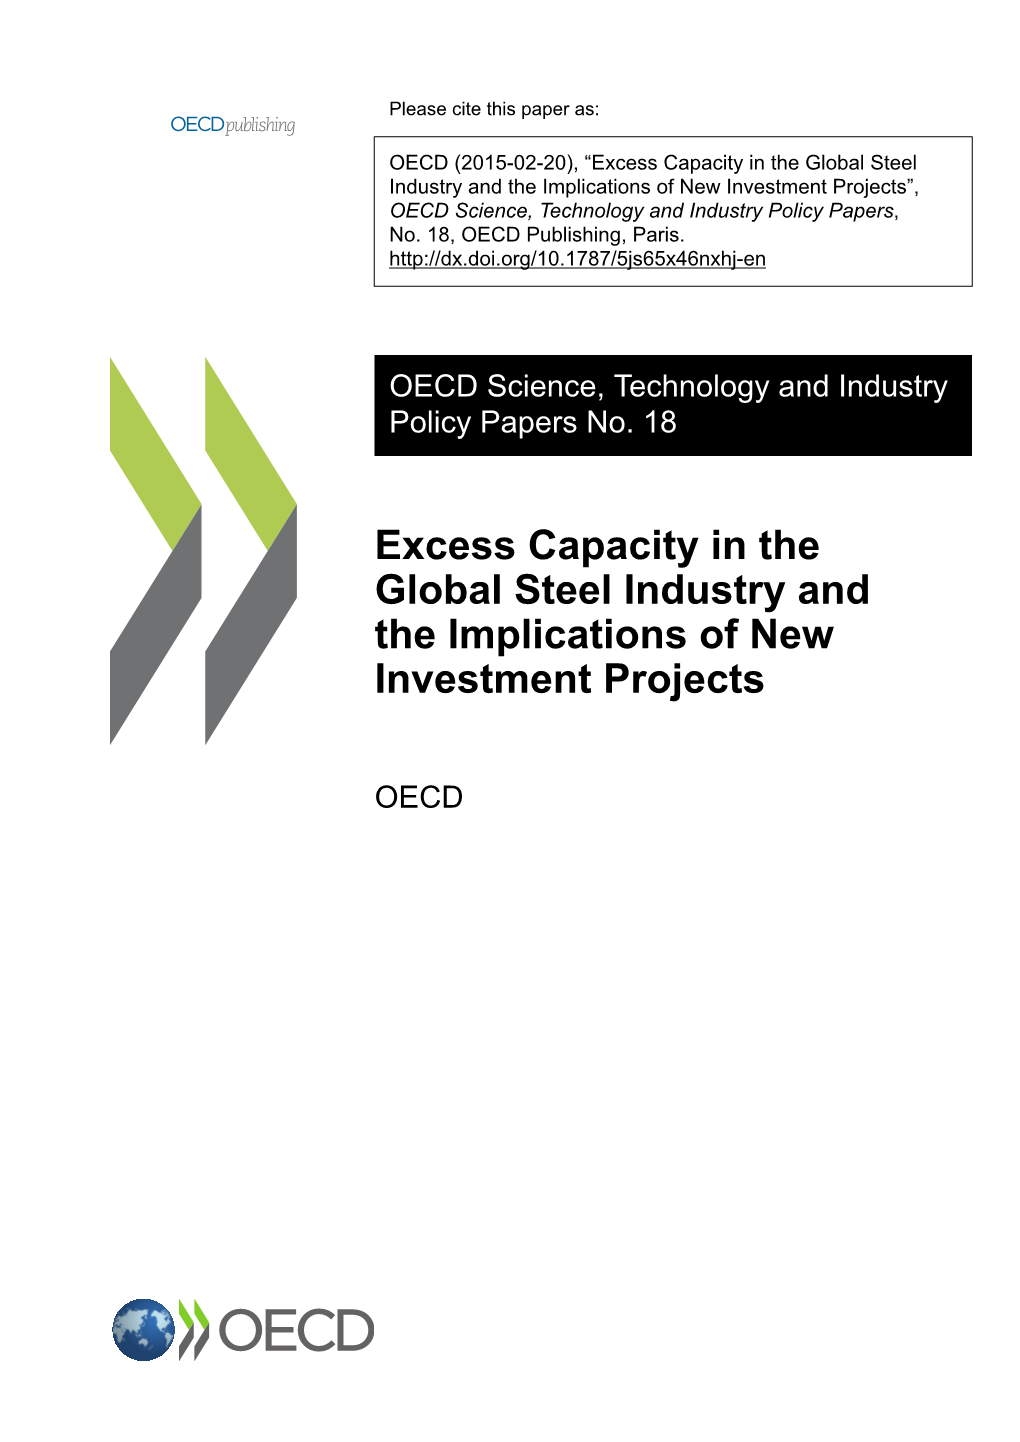 Excess Capacity in the Global Steel Industry and the Implications of New Investment Projects”, OECD Science, Technology and Industry Policy Papers, No